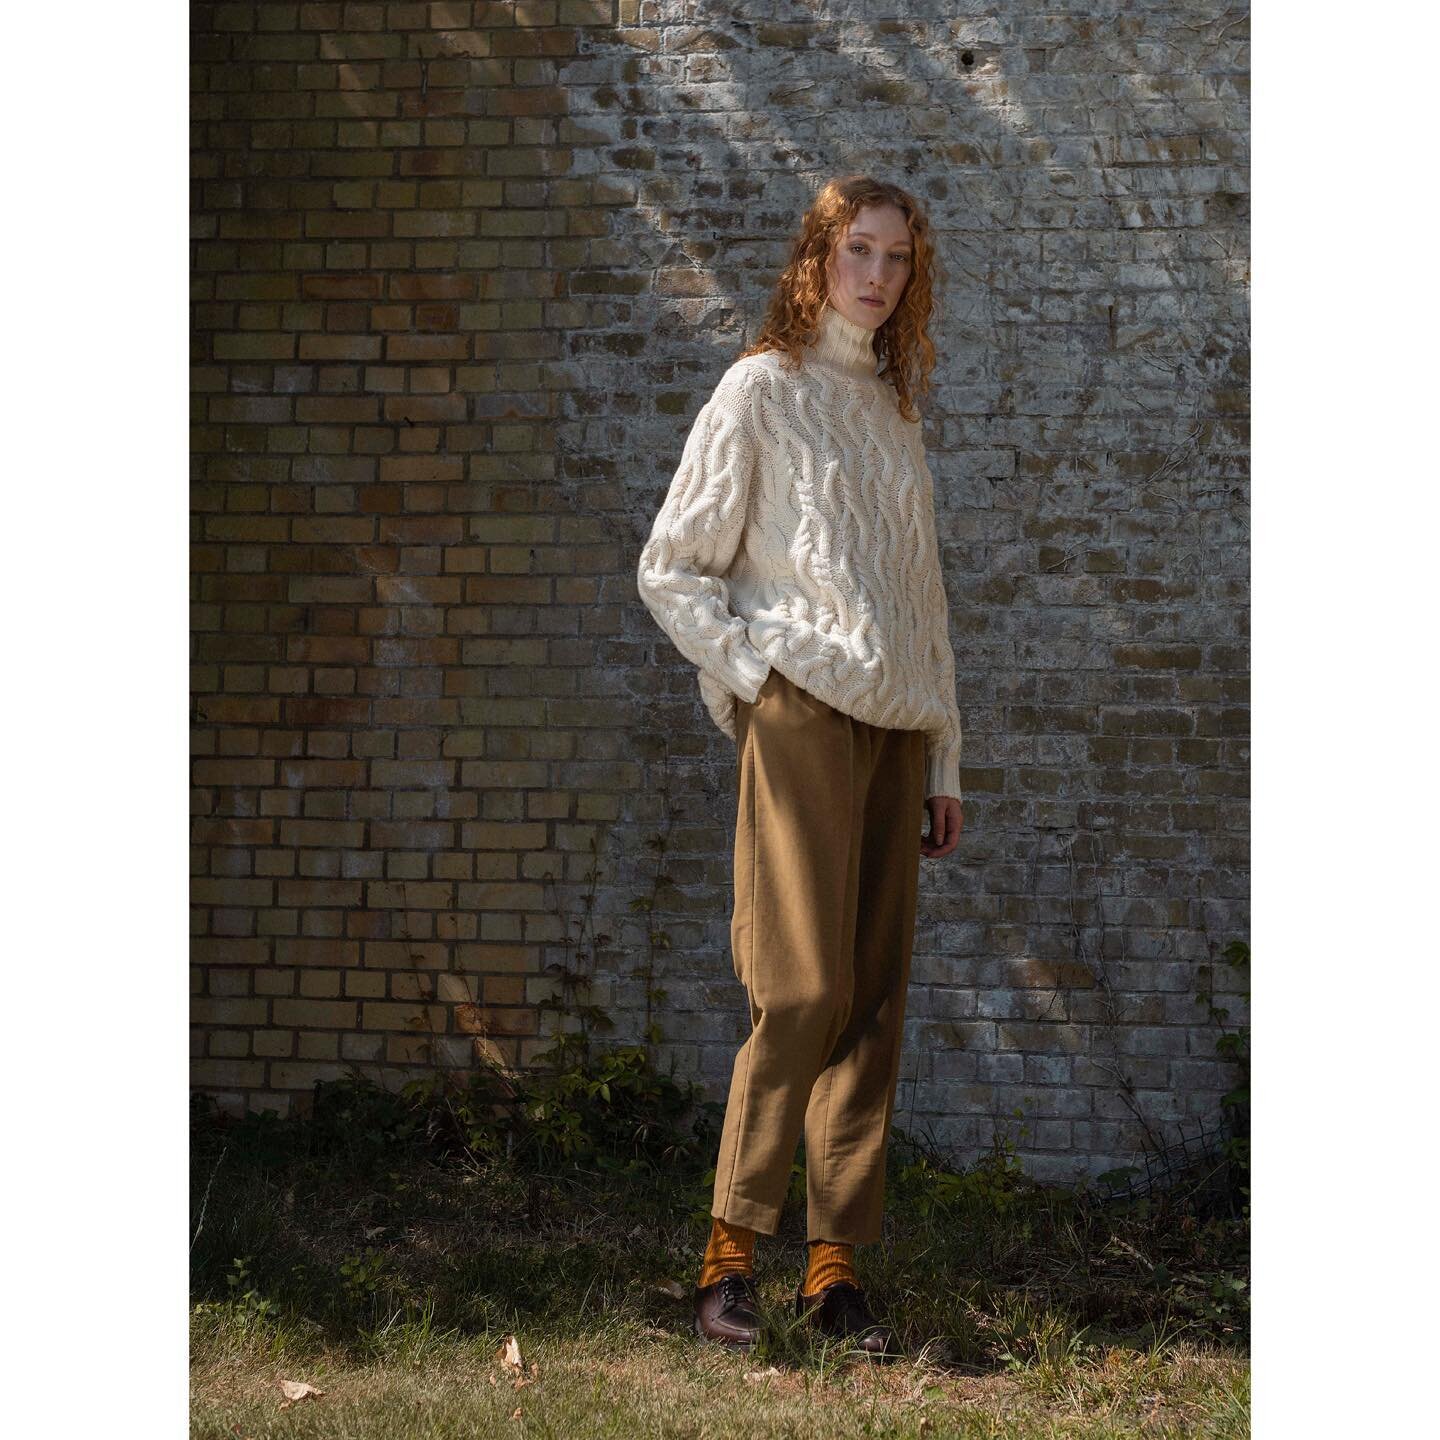 Oh this sunshine... thinking back to Holland&amp;Holland Autumn shoot and garden fun with @lornaforan finding shade, @amyaliceneill styling, @buntercastingarchive castin, @nohelia.reyes on beauty, @oliverjamesnewman and @freddiepayne looking after me